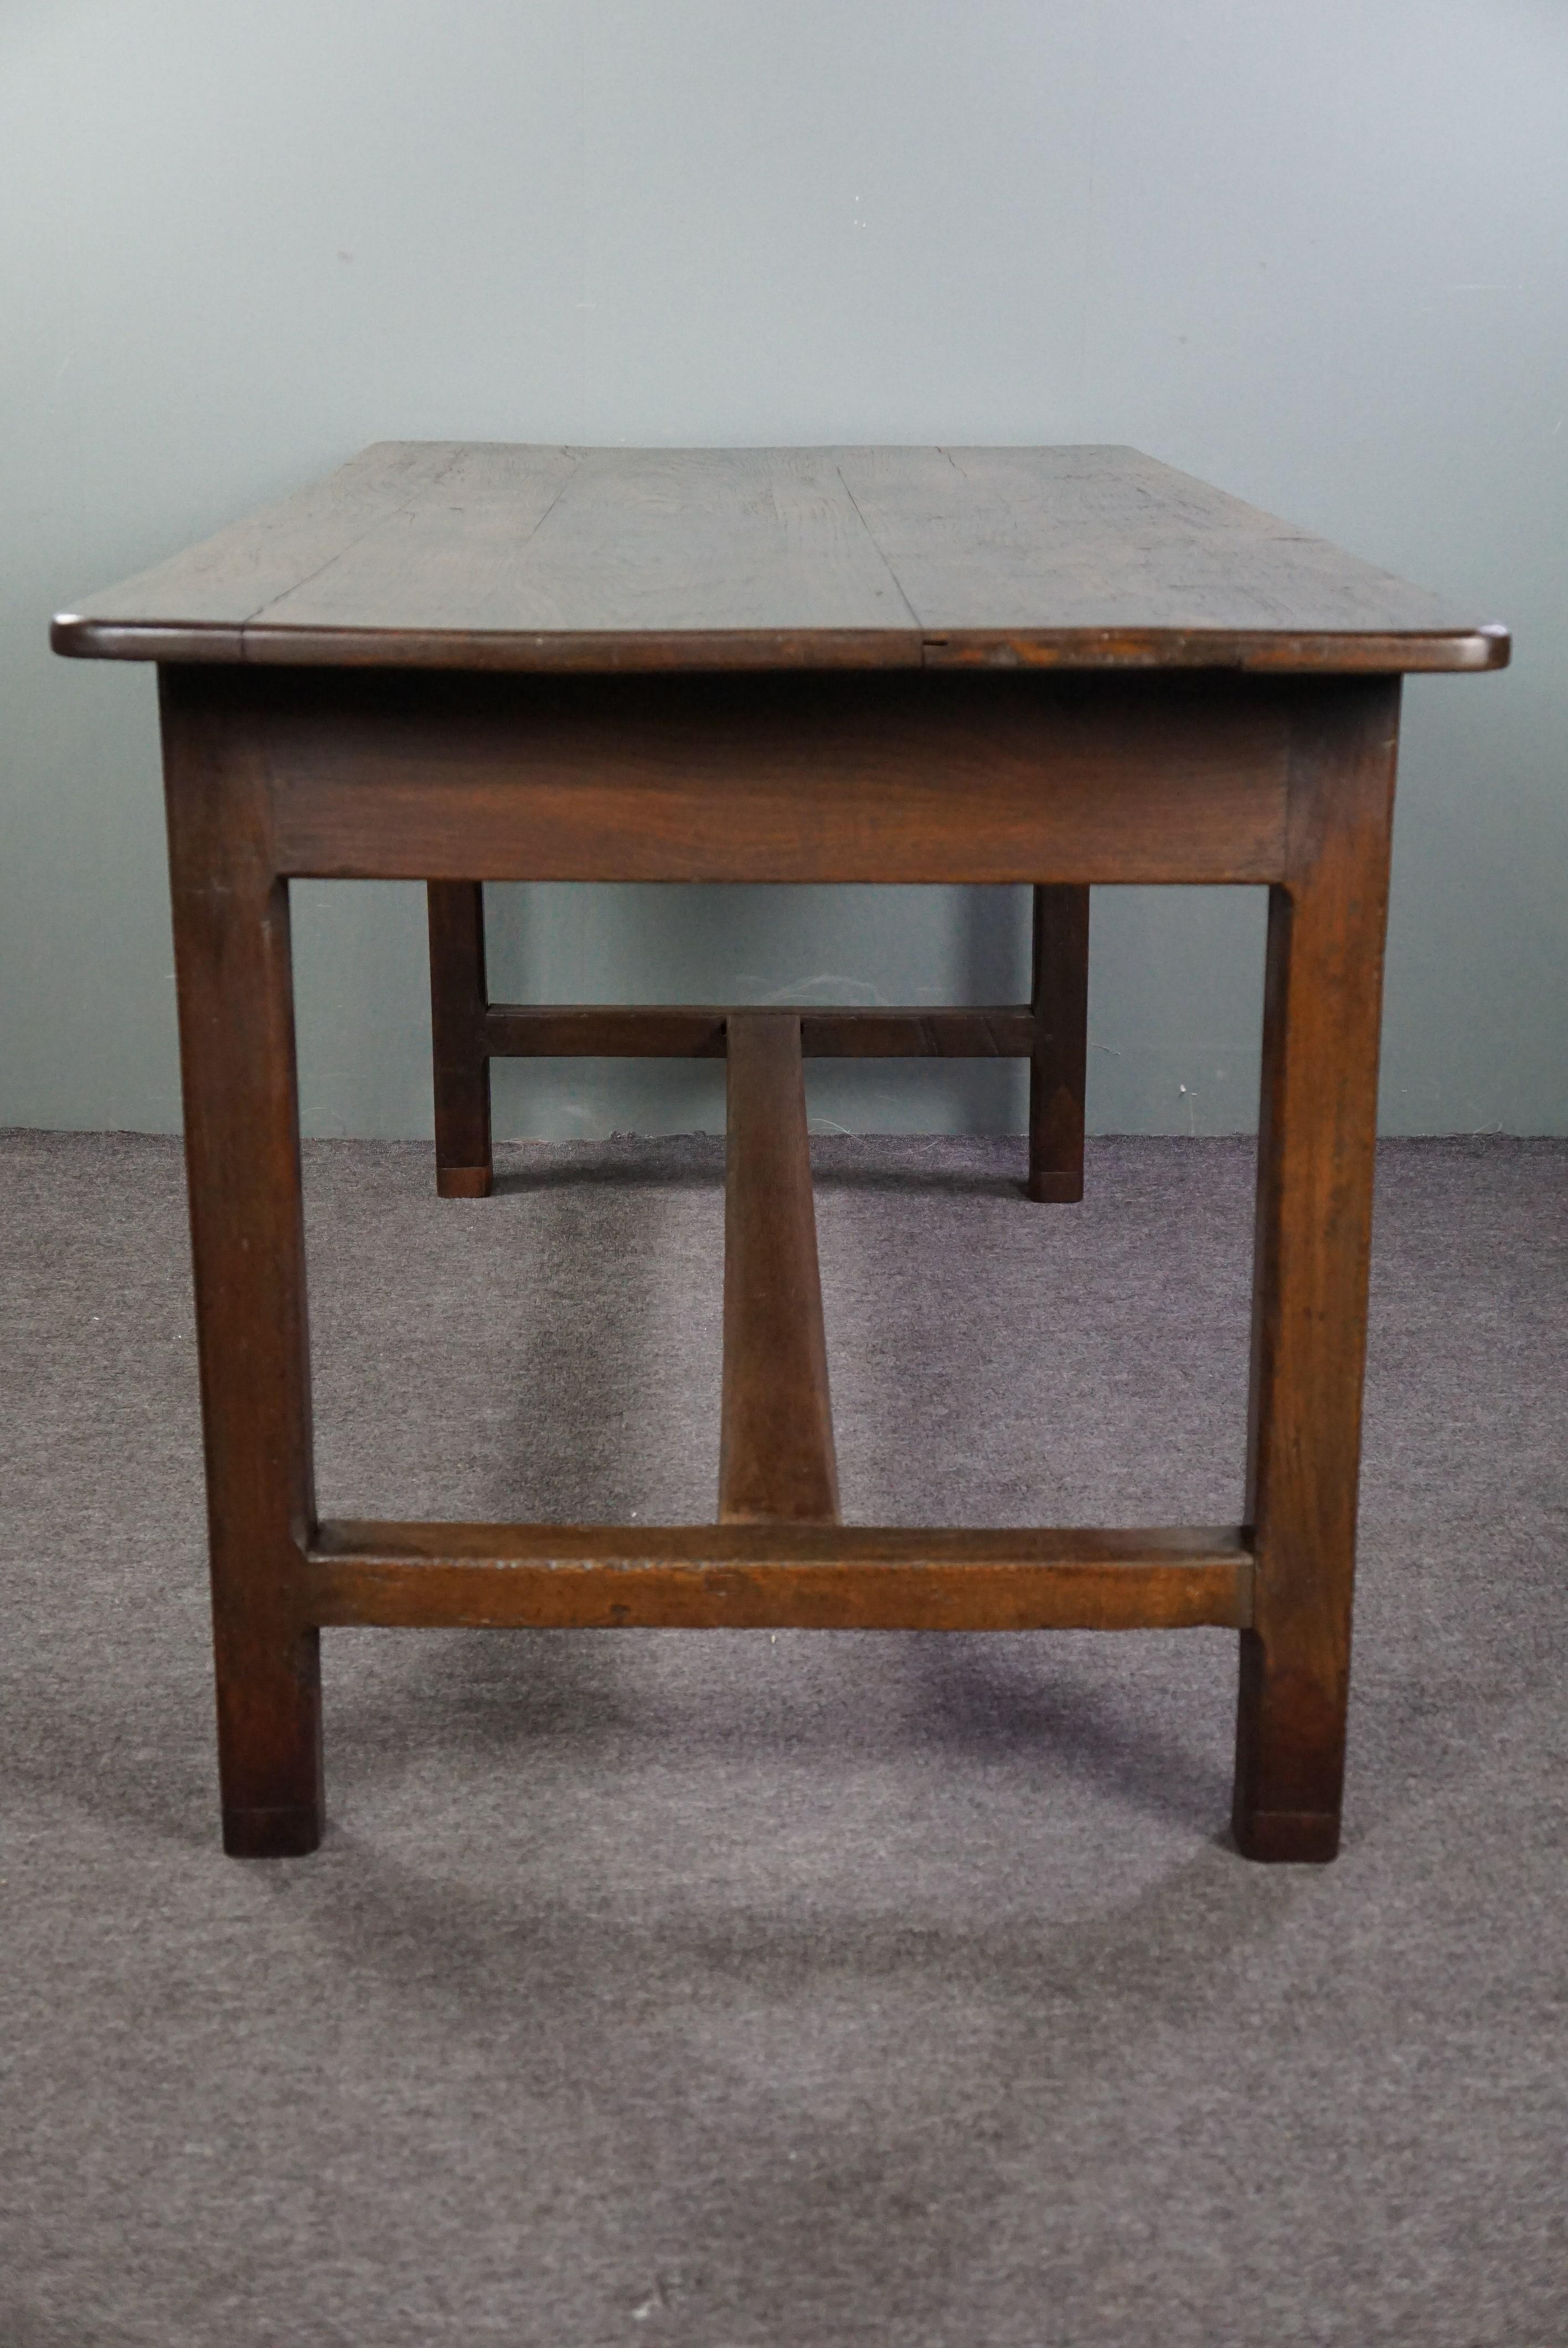 Offered is this robust antique French dining table made of oakwood at the beginning of the 18th century. This beautiful, pure antique dining table has a fantastic robust appearance and fits perfectly into both modern and classic interiors. You can